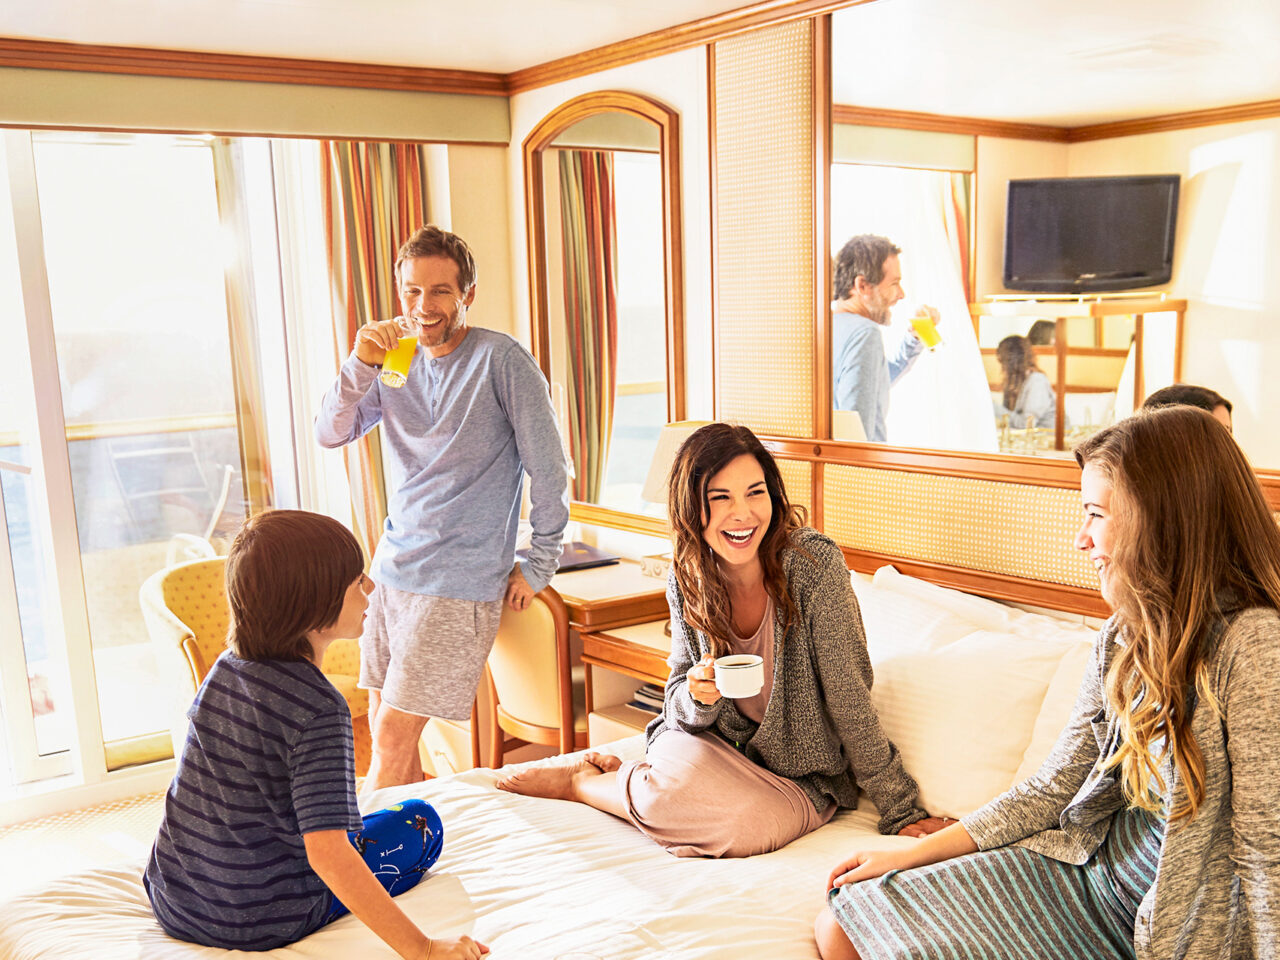 cruise deals family of 4